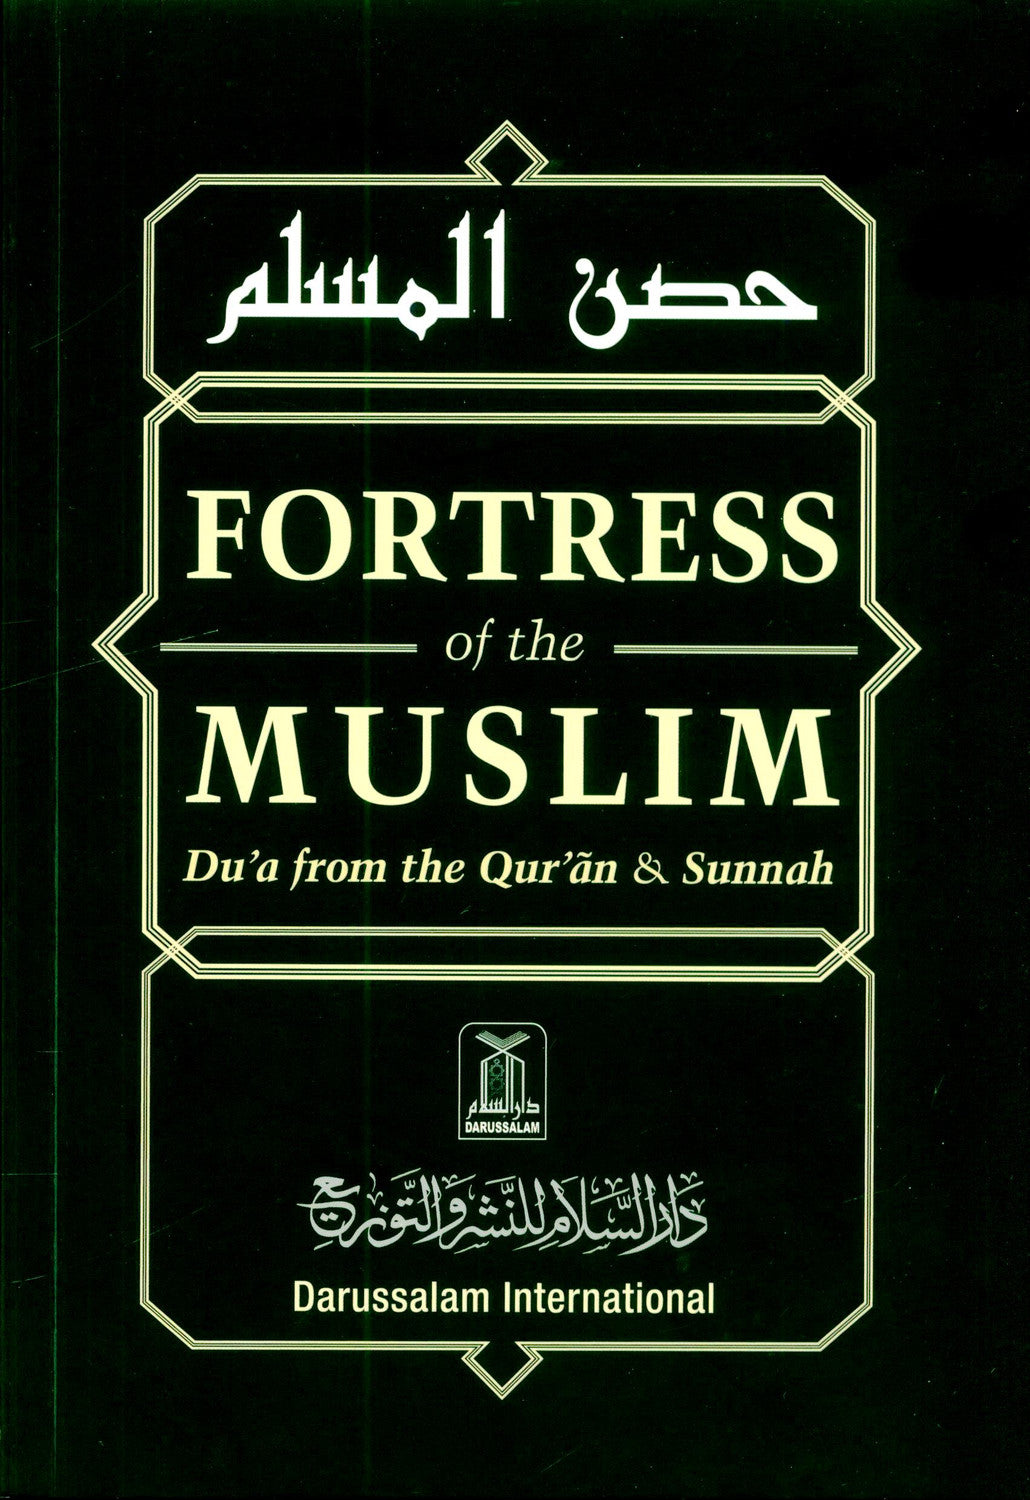 Fortress of the Muslim Dua from the Quran & Sunnah